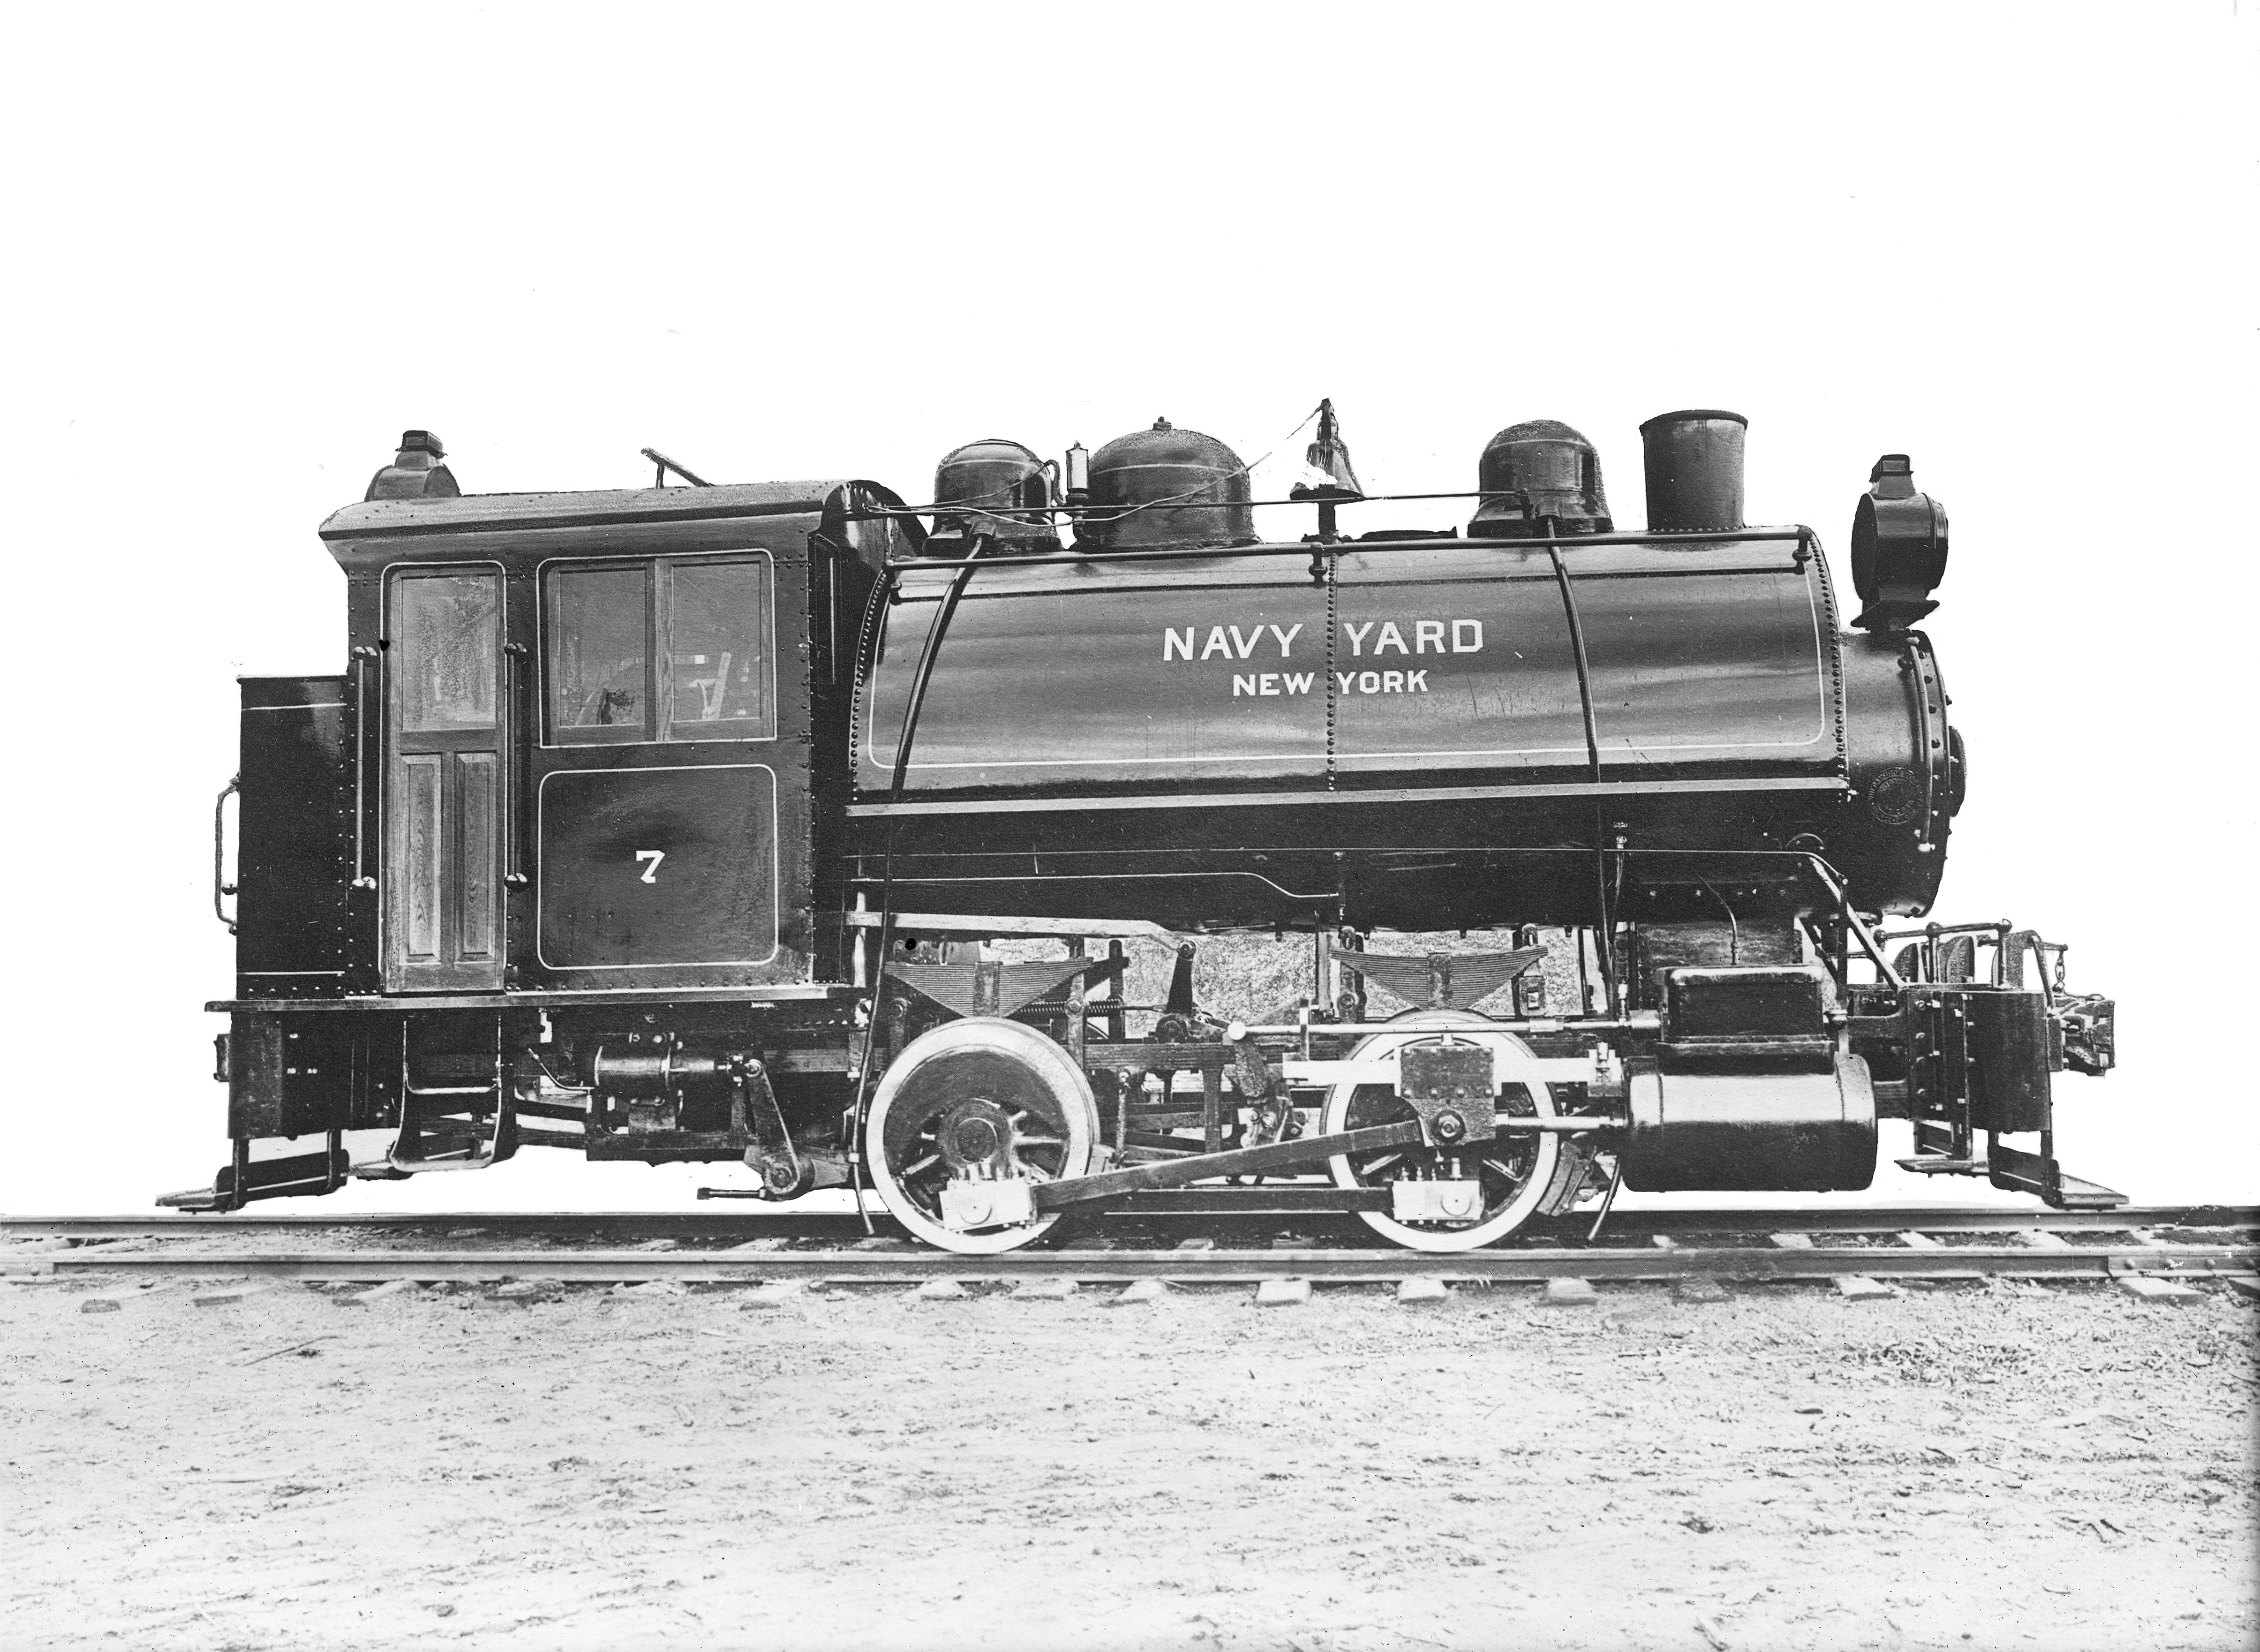 Black and white locomotive with Navy Yard - New York printed on the side.